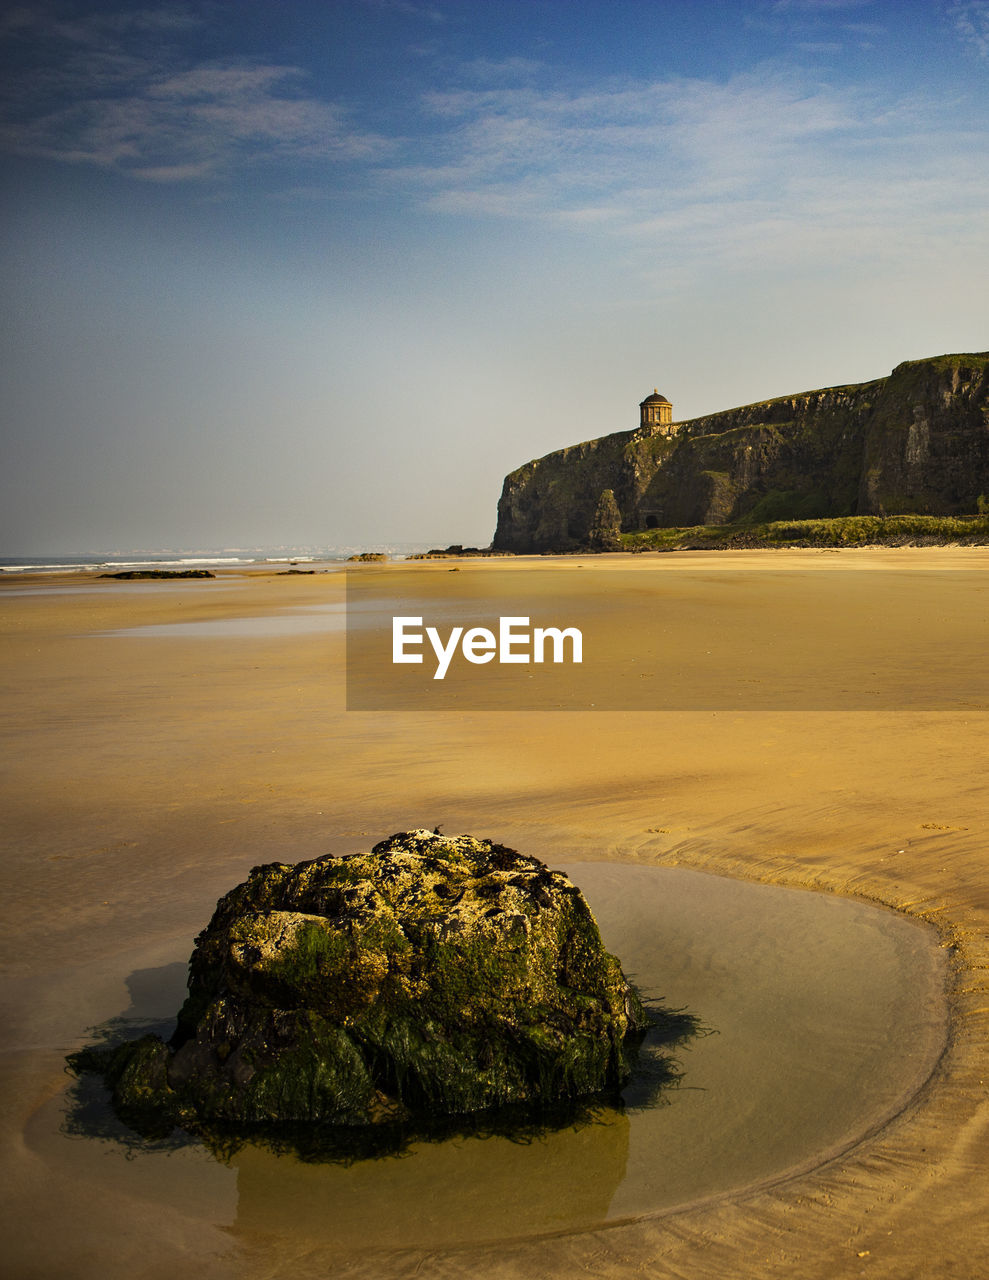 Downhill beach and mussenden temple